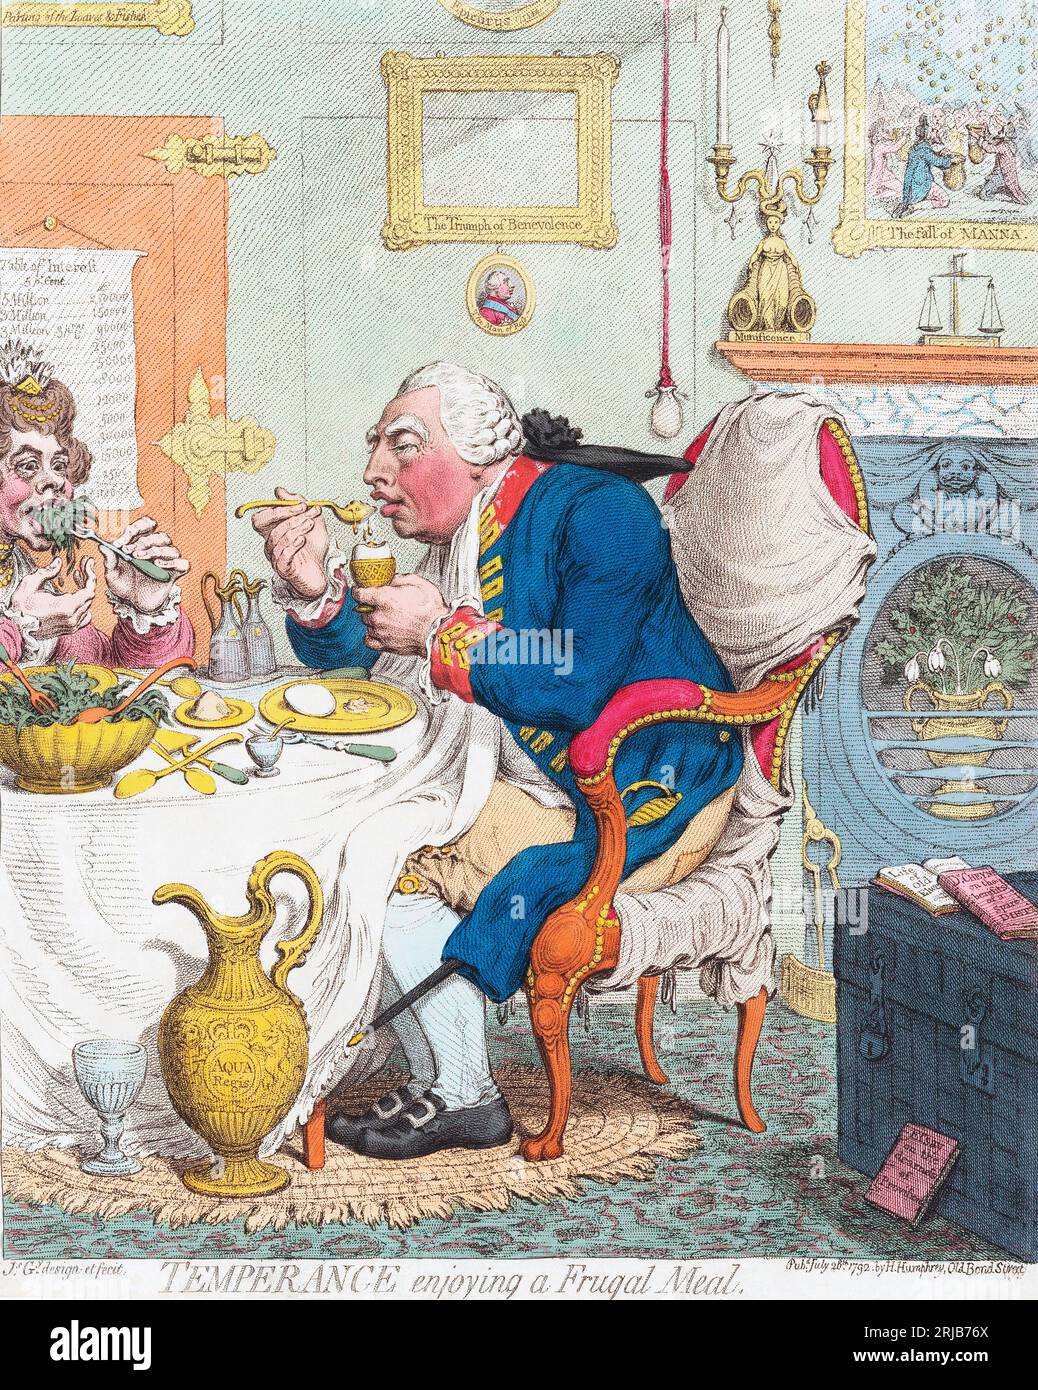 'Temperance enjoying a frugal meal'.  A satirical print by James Gillray dated 28 July 1792.   King George III and his wife Queen Charlotte eating one of their famously frugal meals. Stock Photo